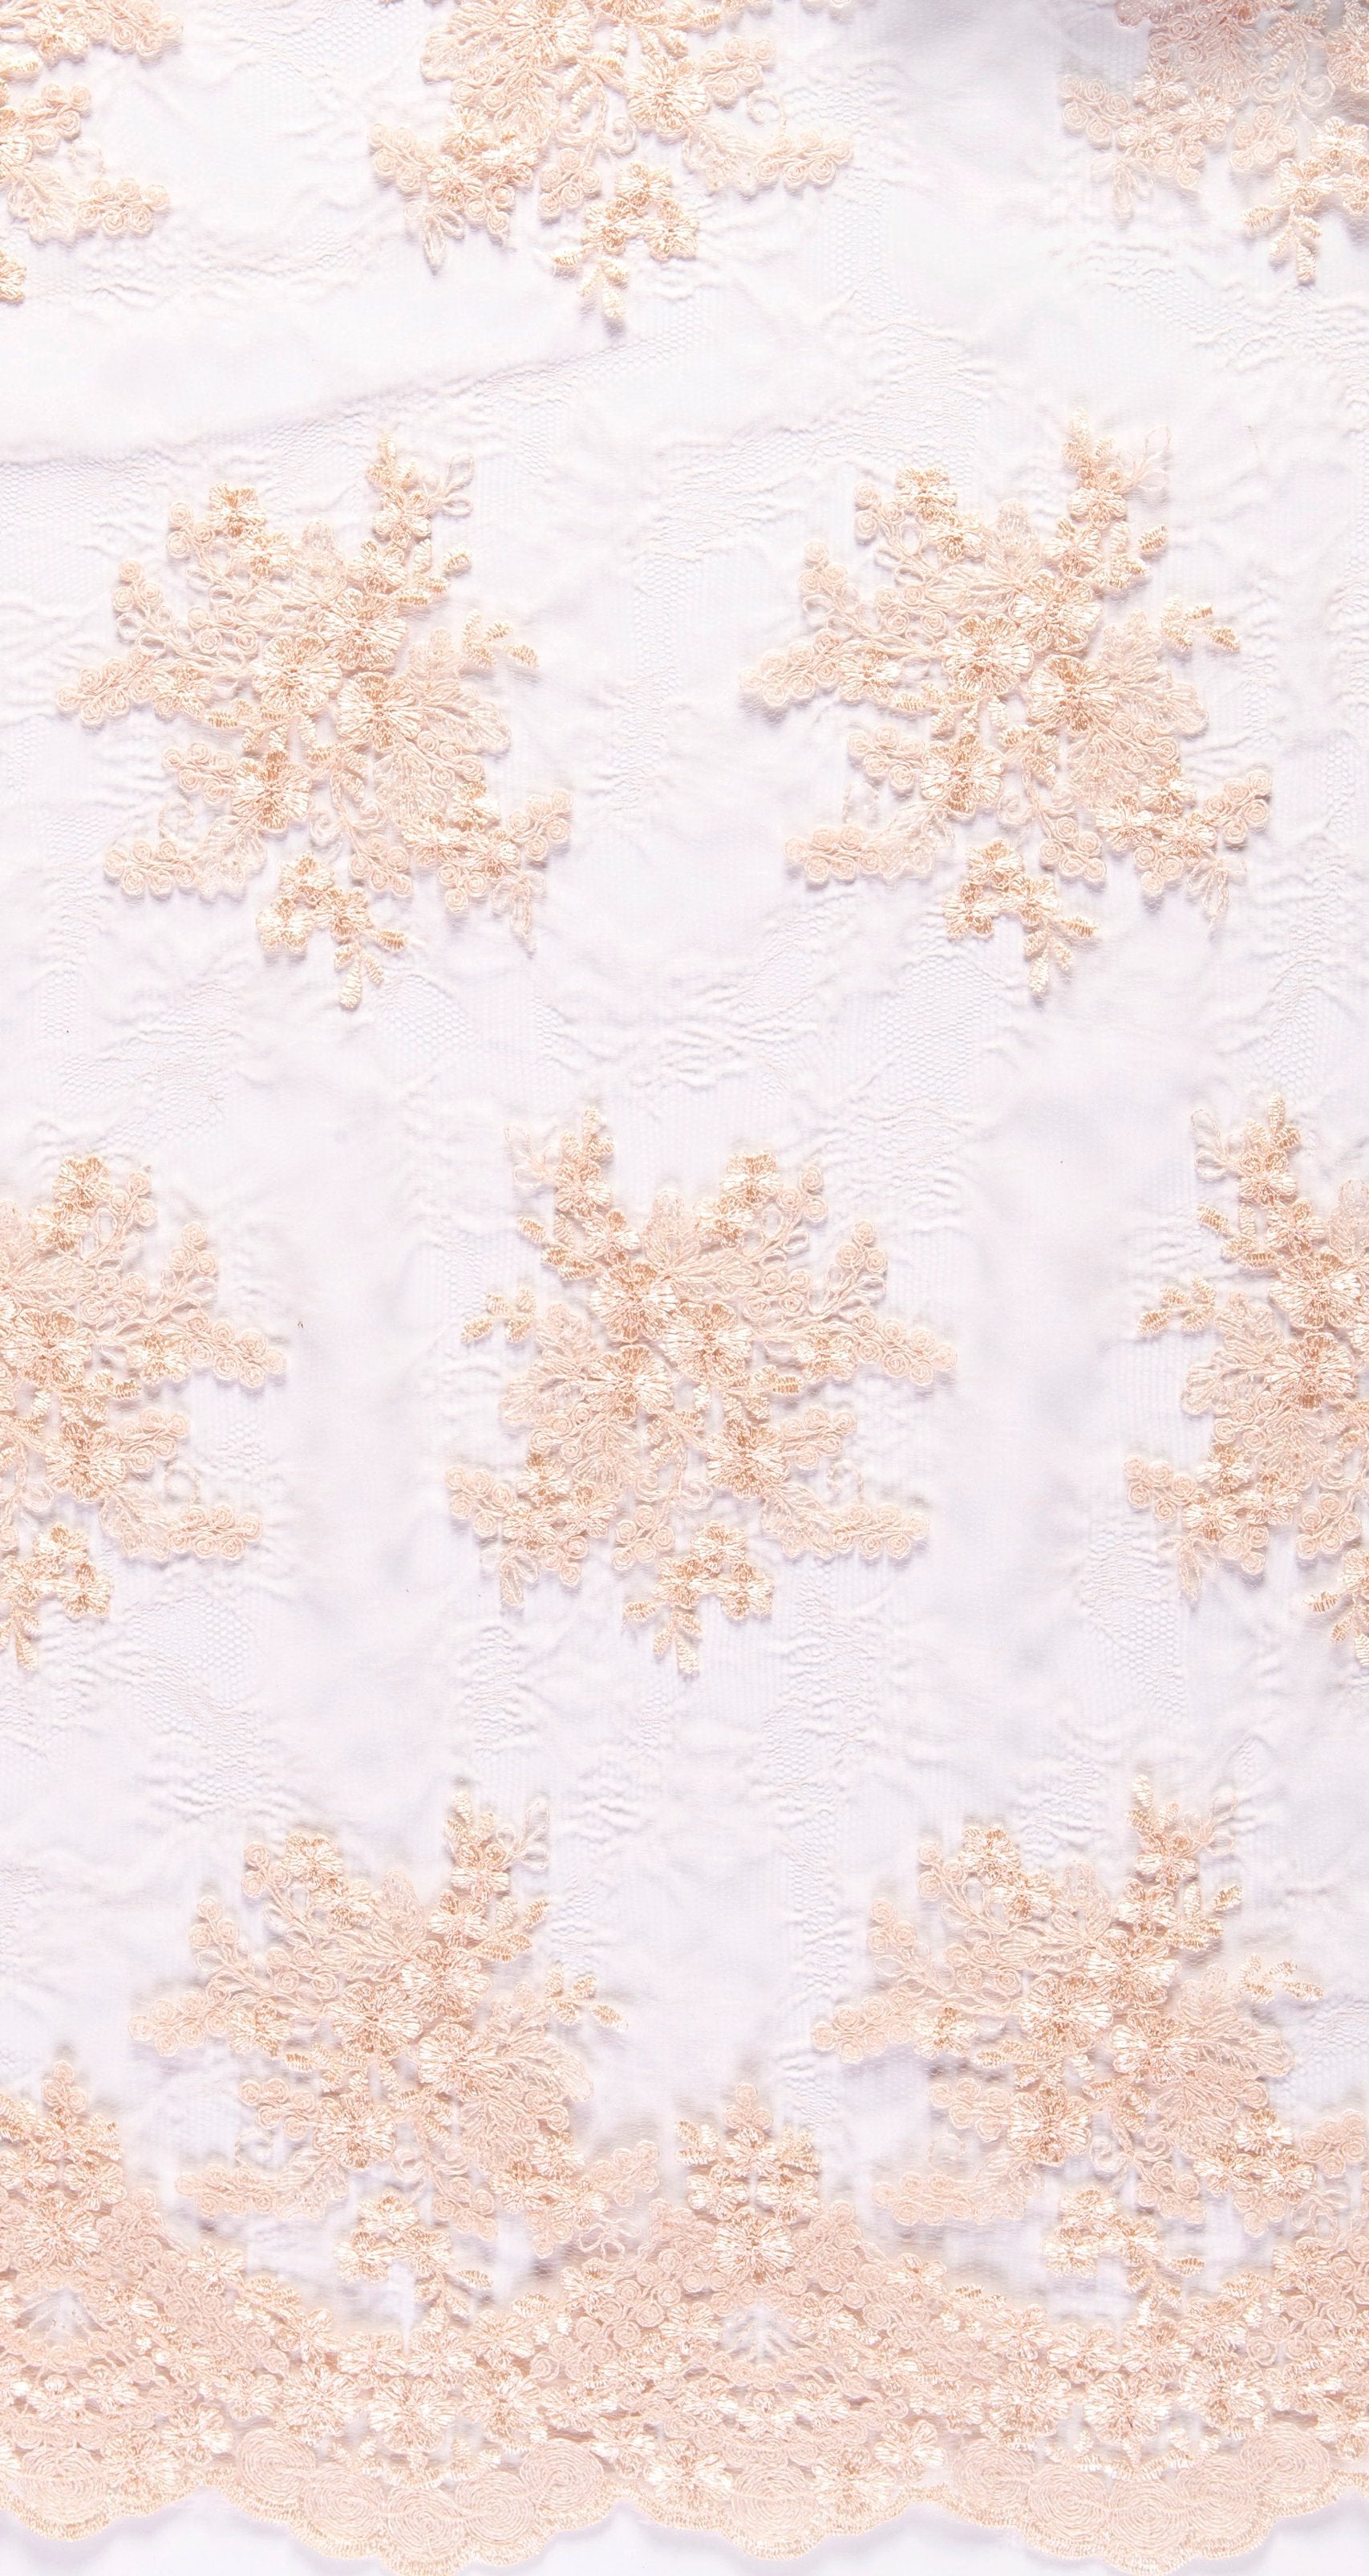 Cream Scalloped Edged Stringed Floral Embroidered Lace Fabric | Burç Fabric